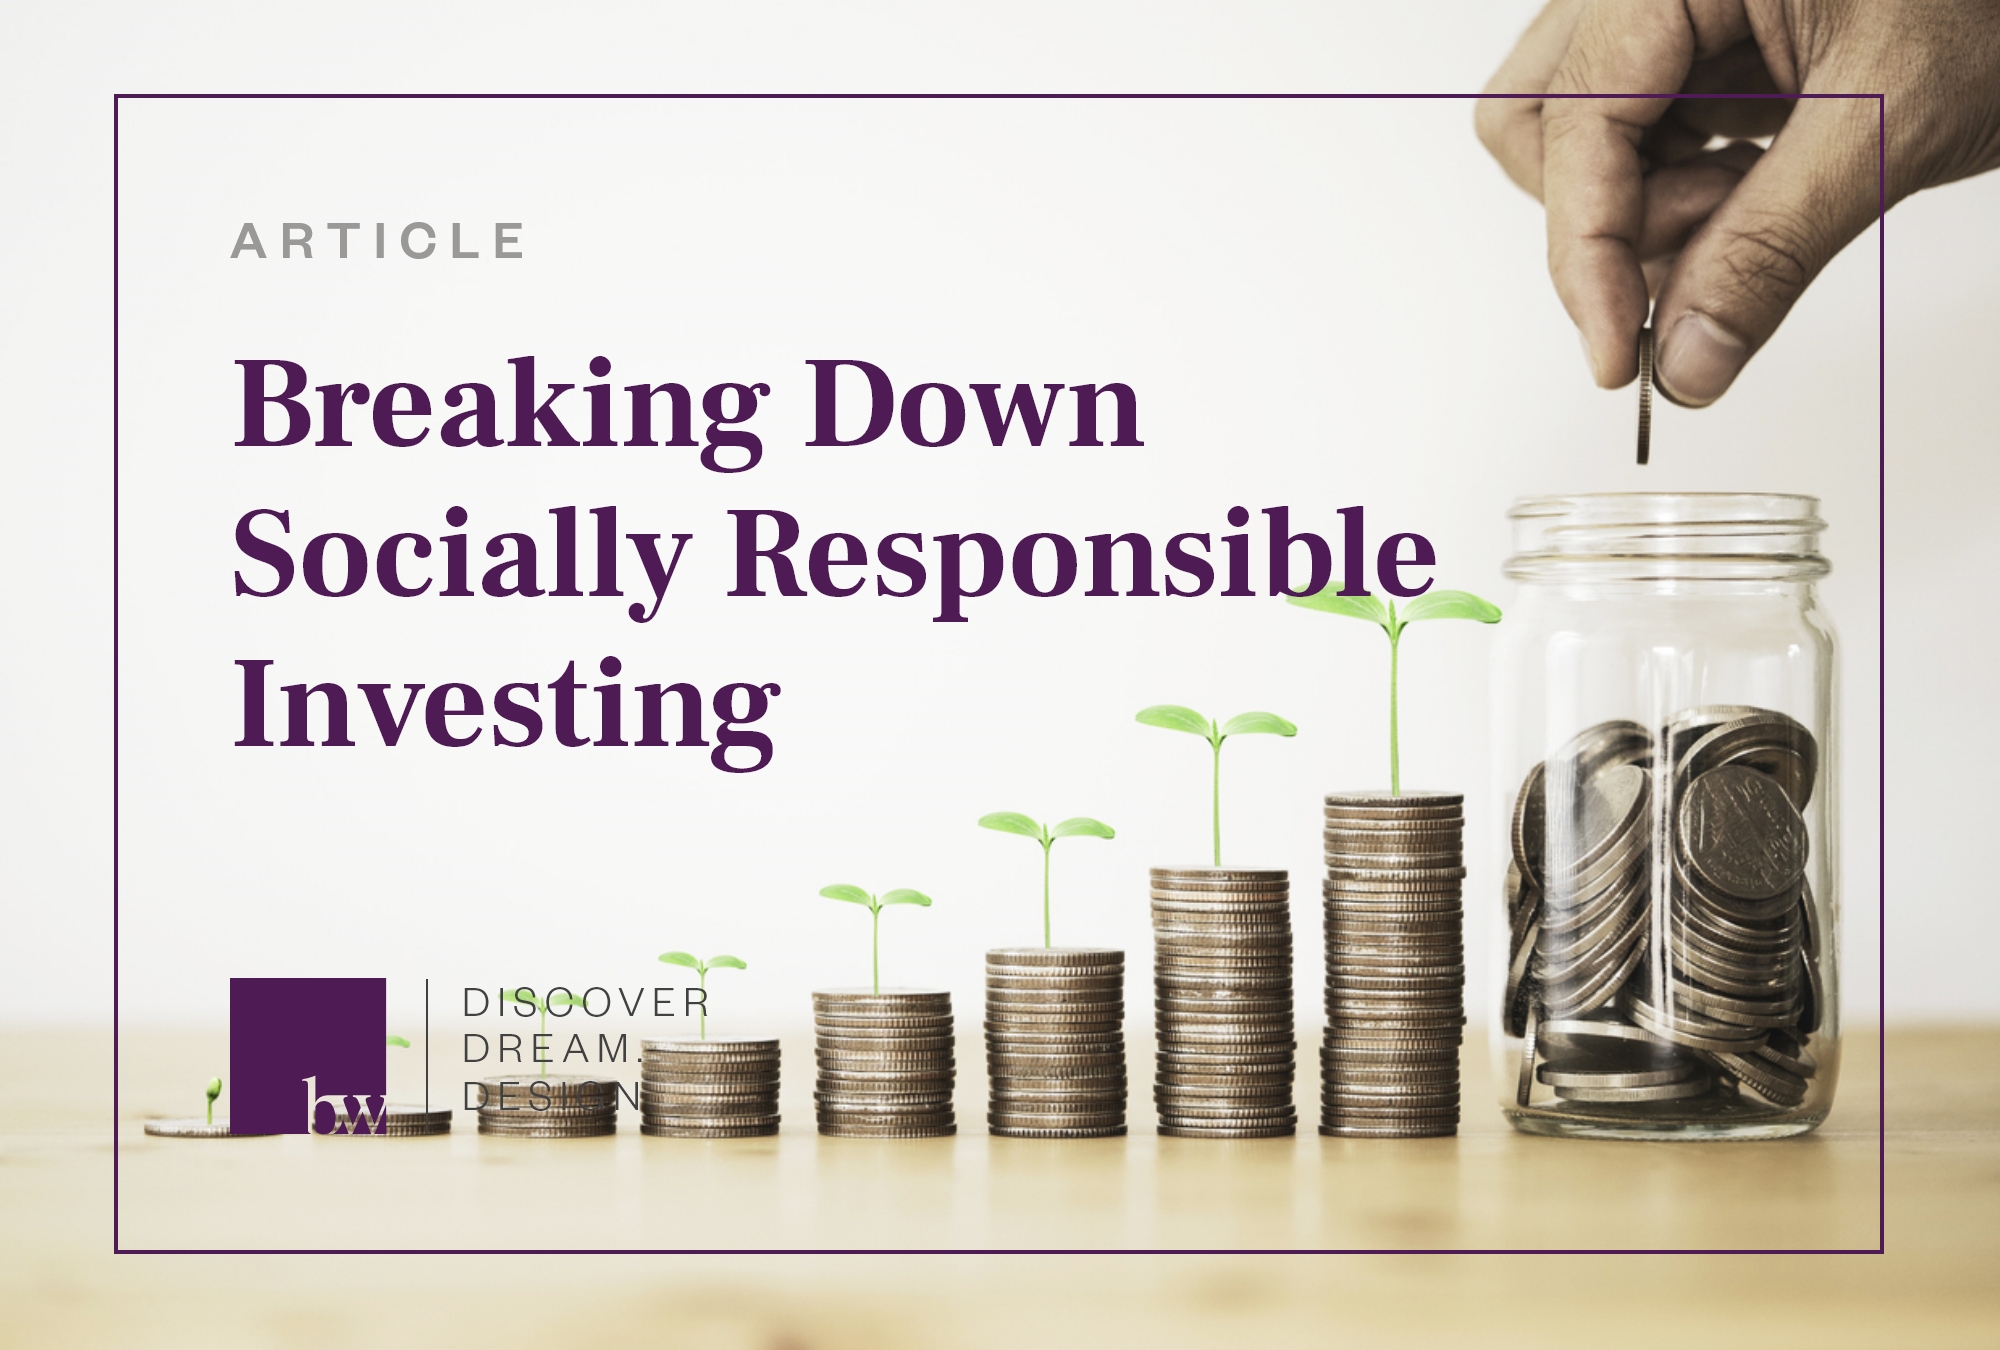 Investing in socially responsible large-cap dividend stocks